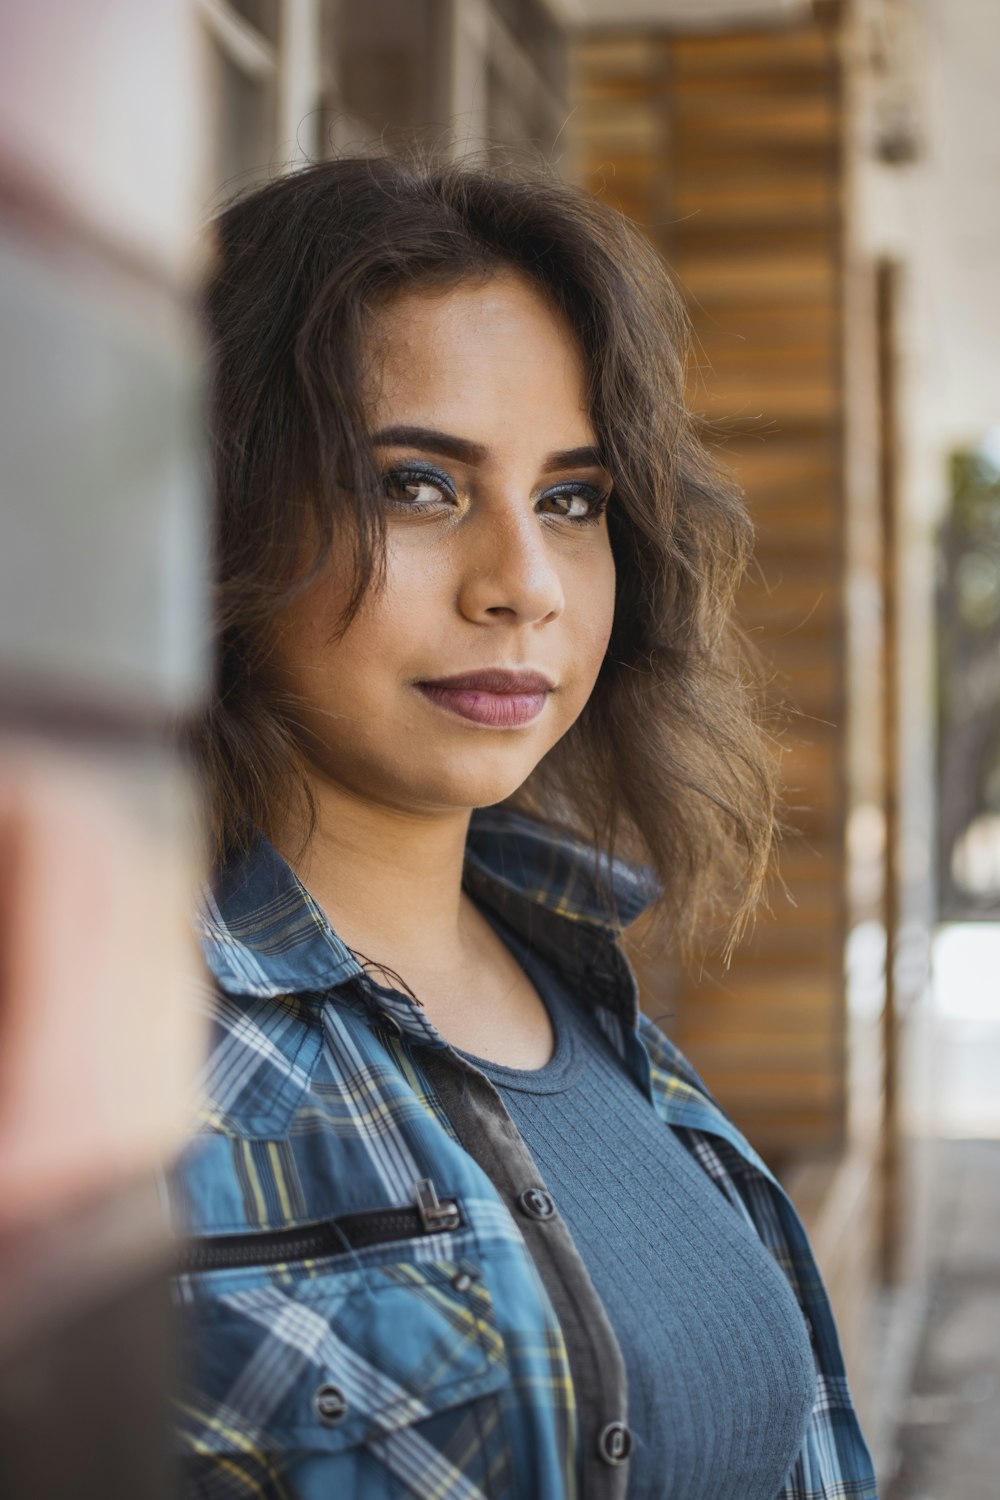 woman wearing blue and gray plaid sport shirt